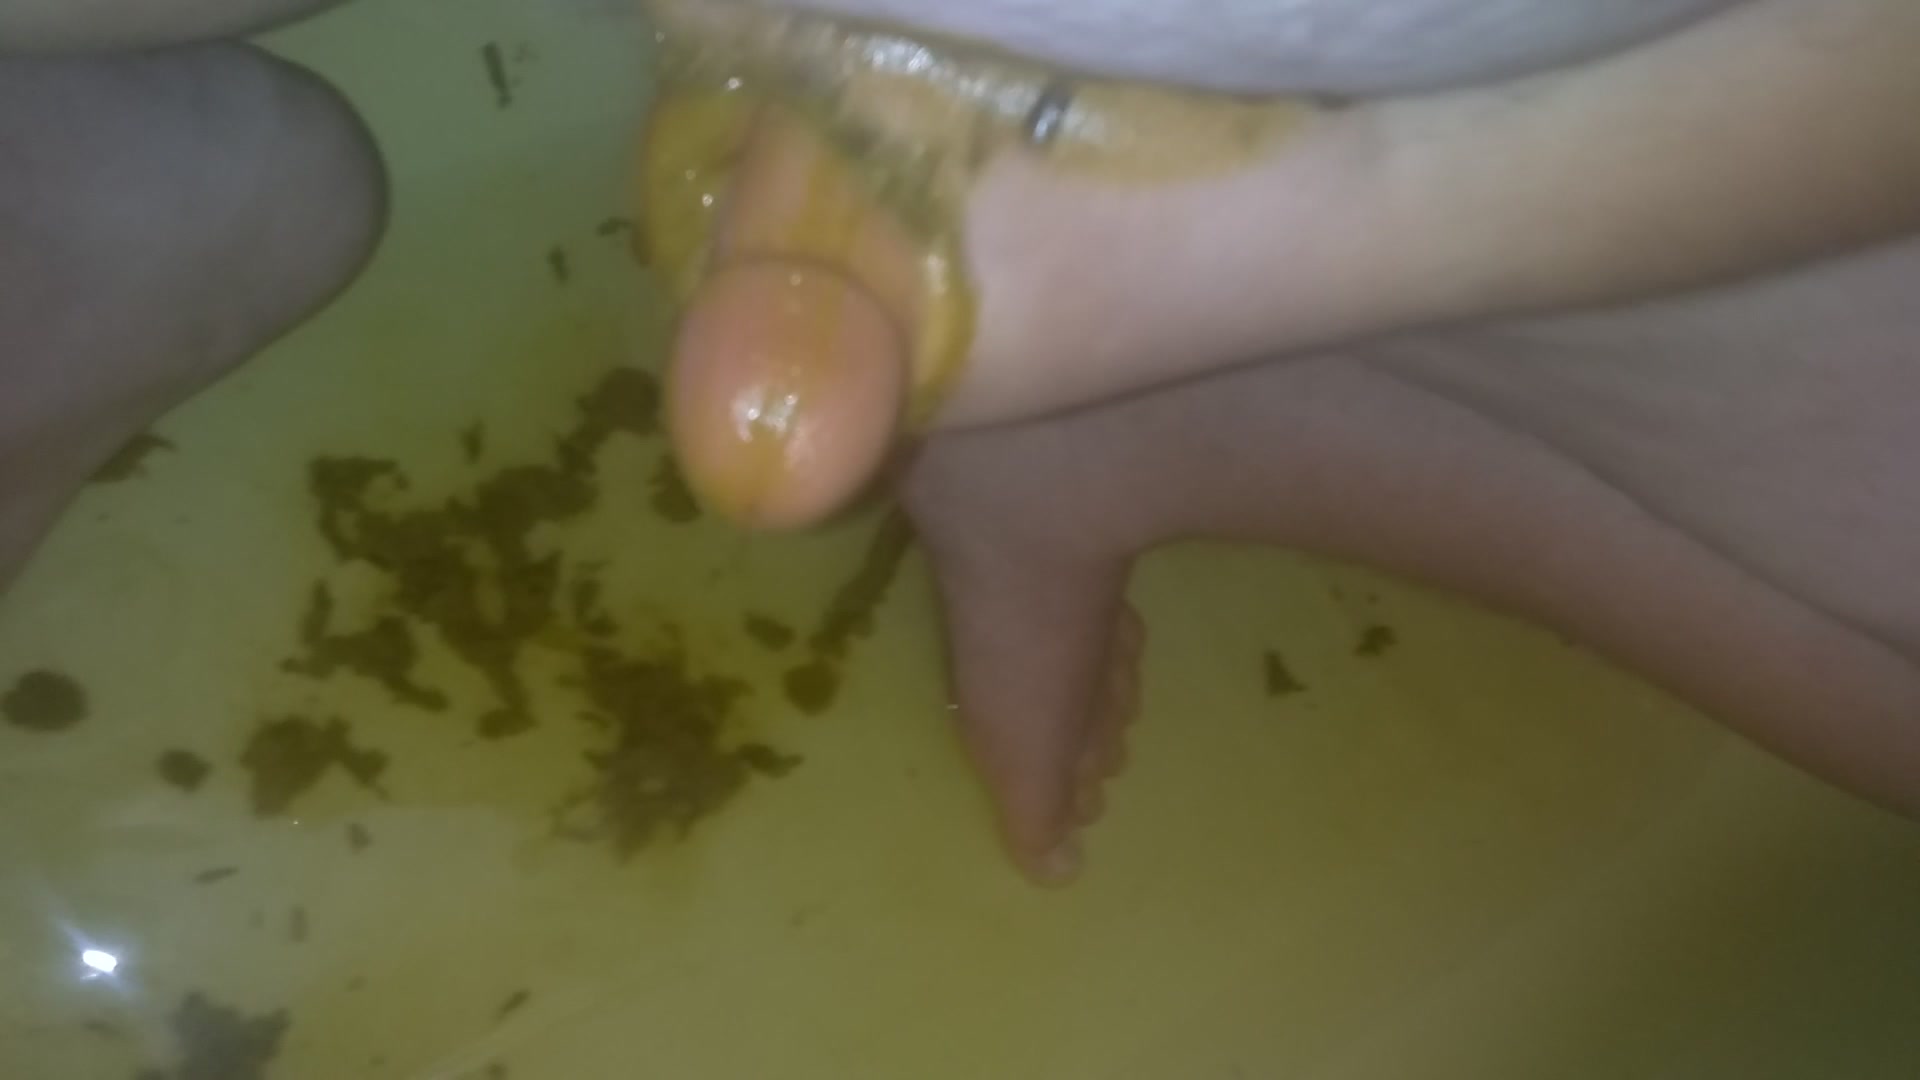 Jerking off with some fresh shit